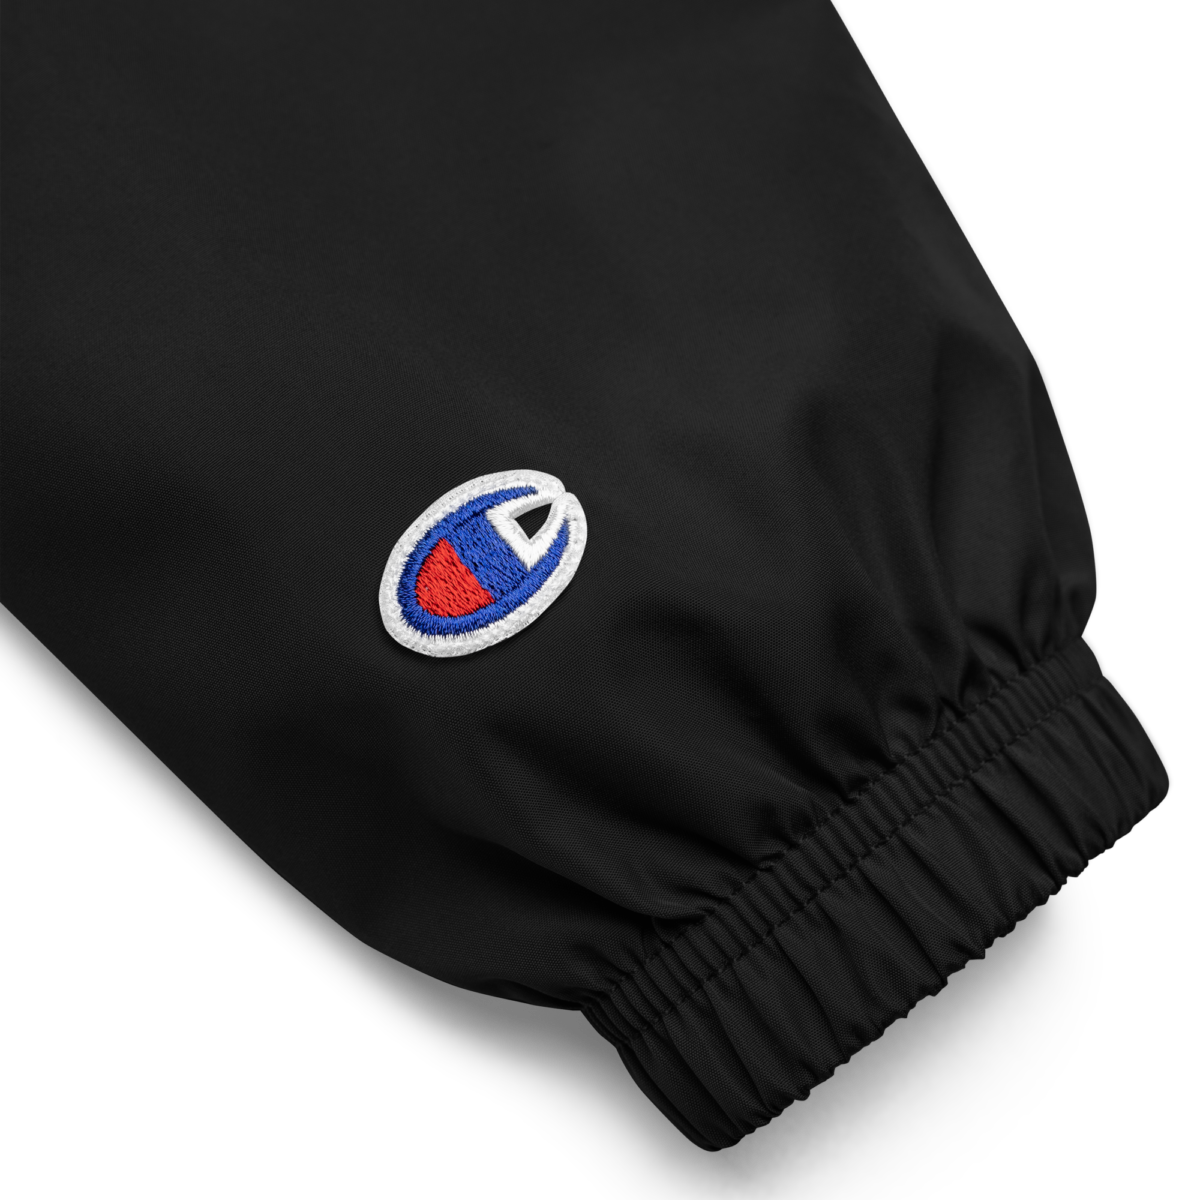 embroidered champion packable jacket black product details 631f50ca5e5d0 - Binance x Champion Packable Jacket